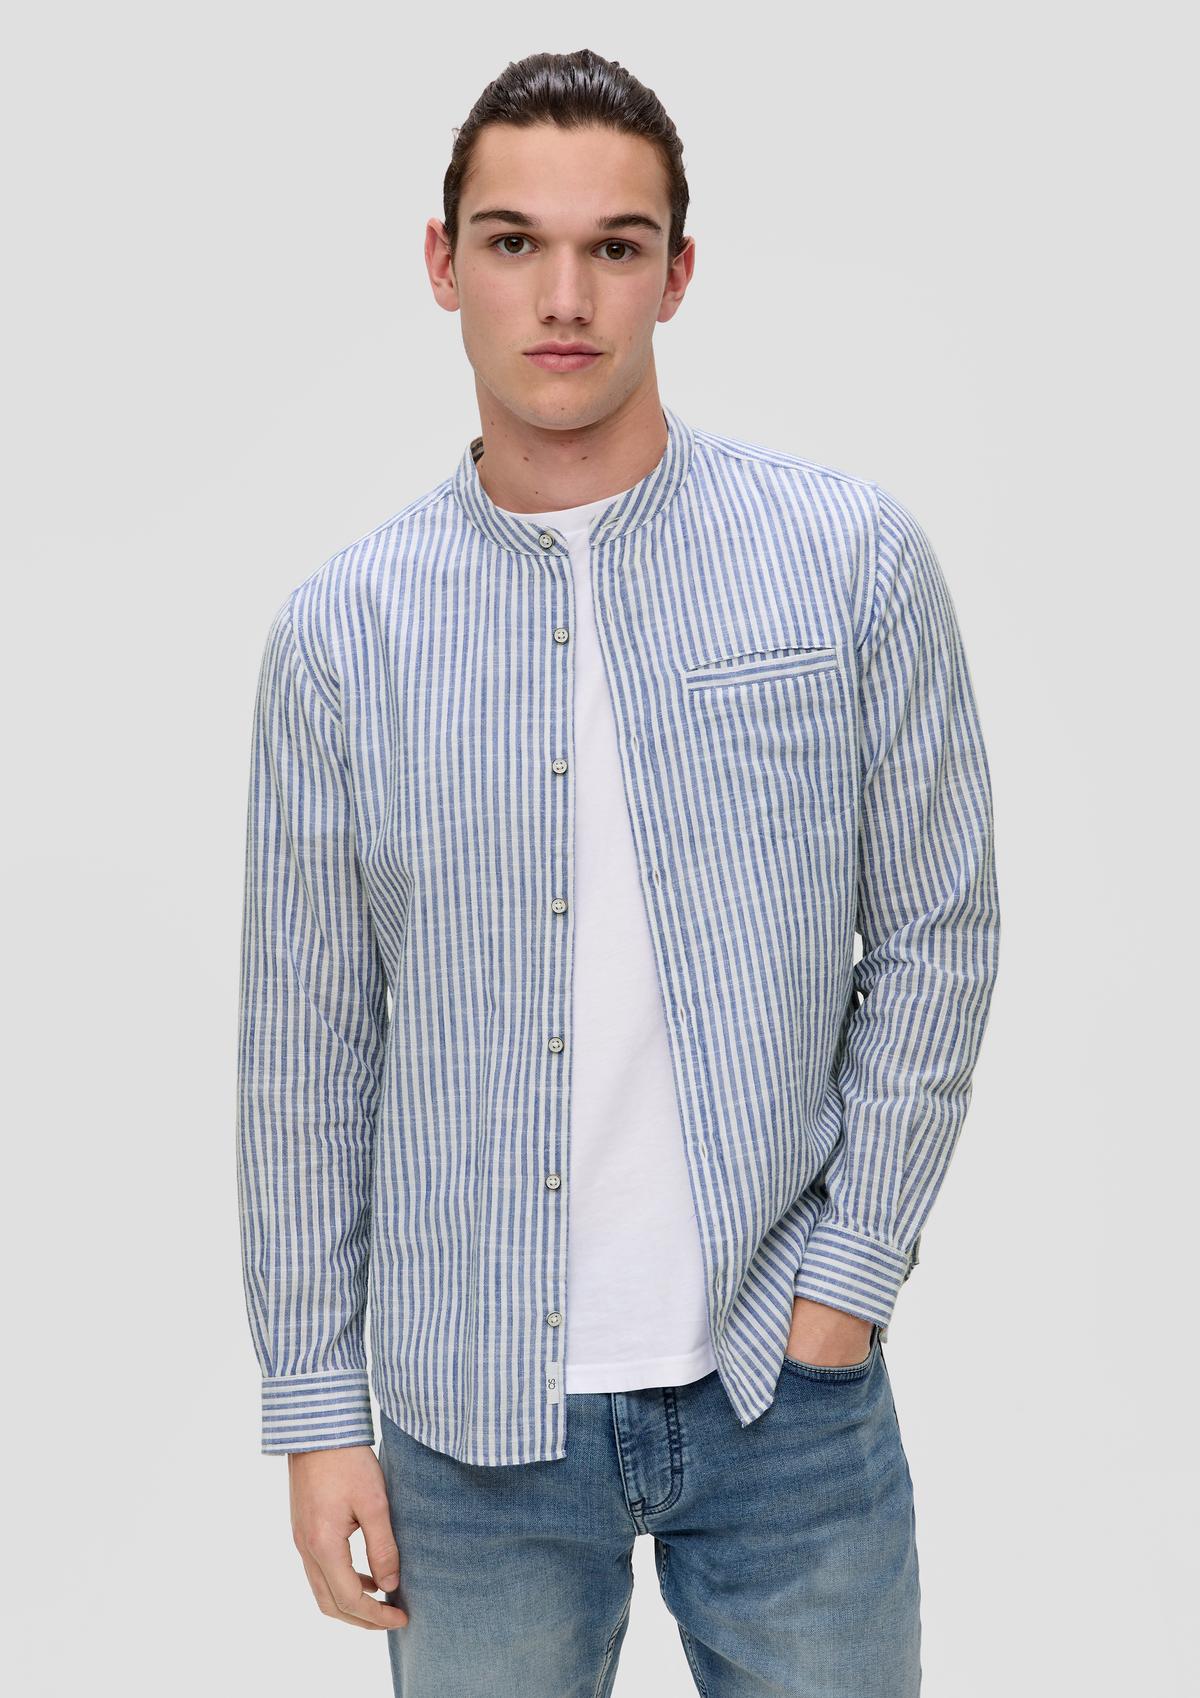 s.Oliver Shirt with a woven texture